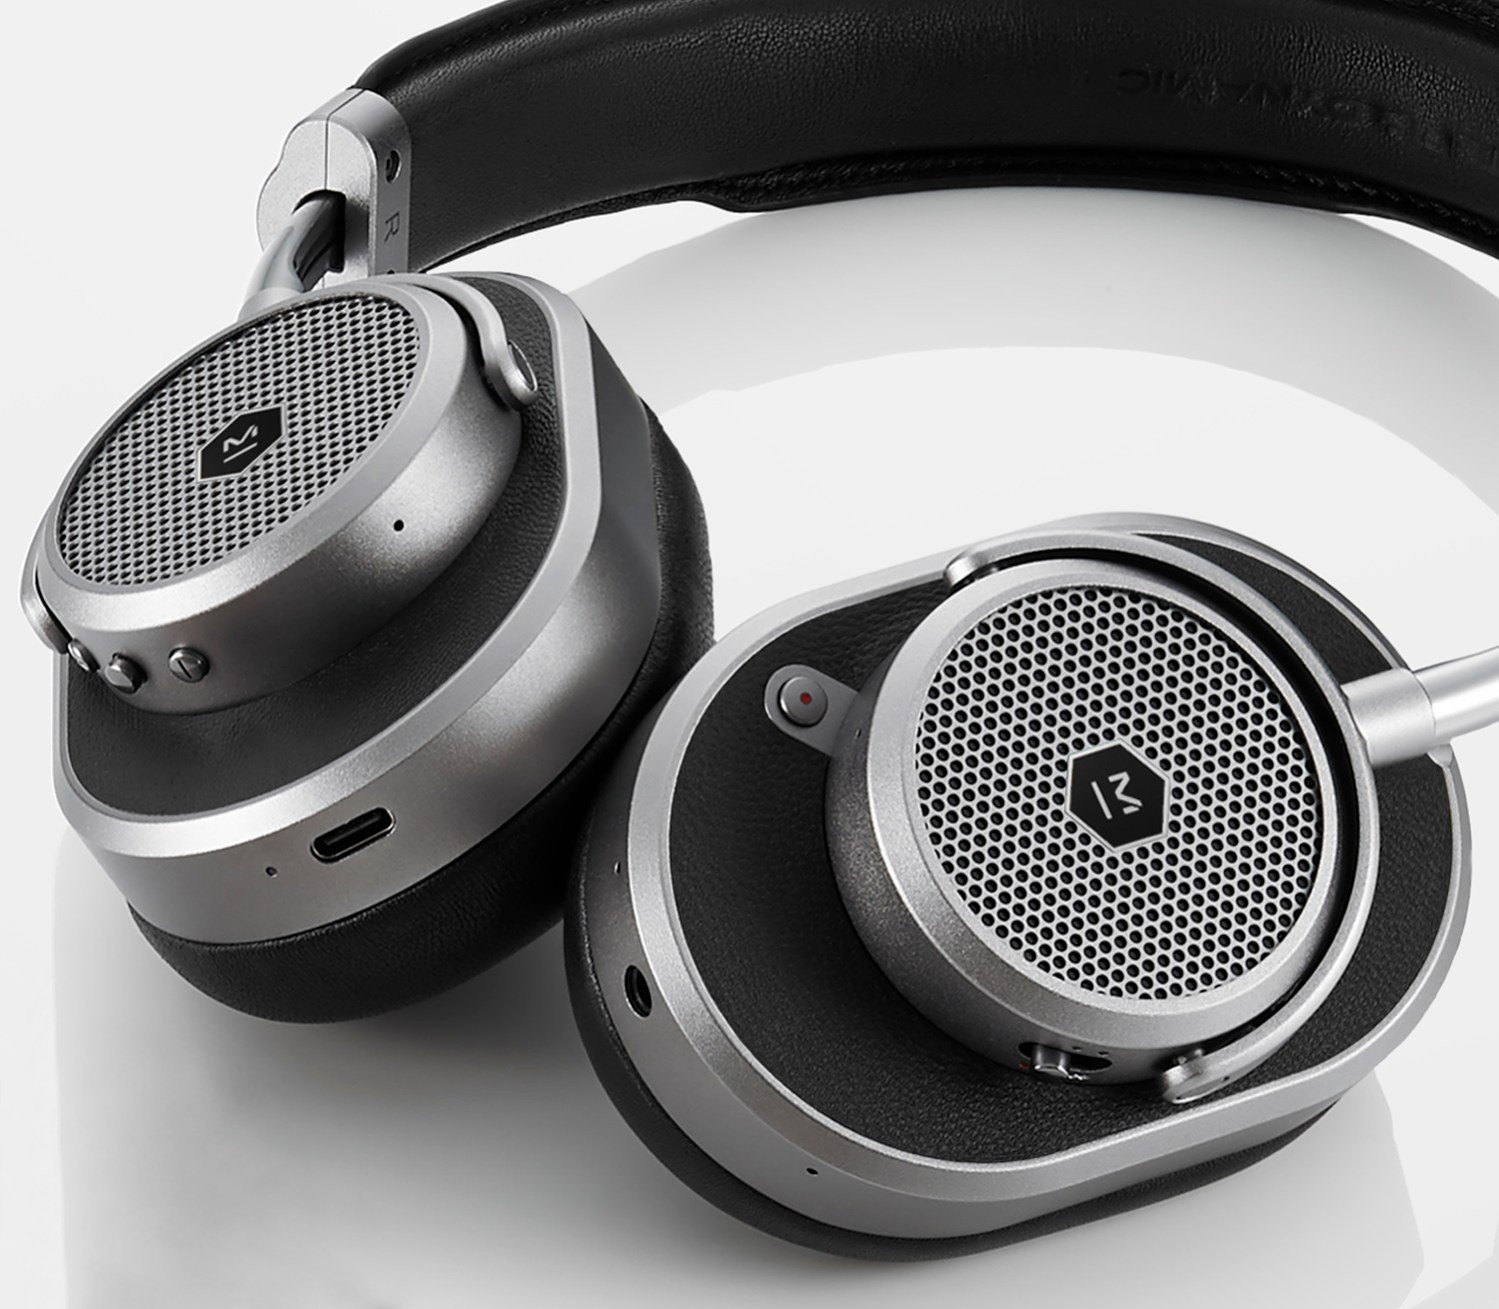 The MW65 is our most technically sophisticated headphone yet